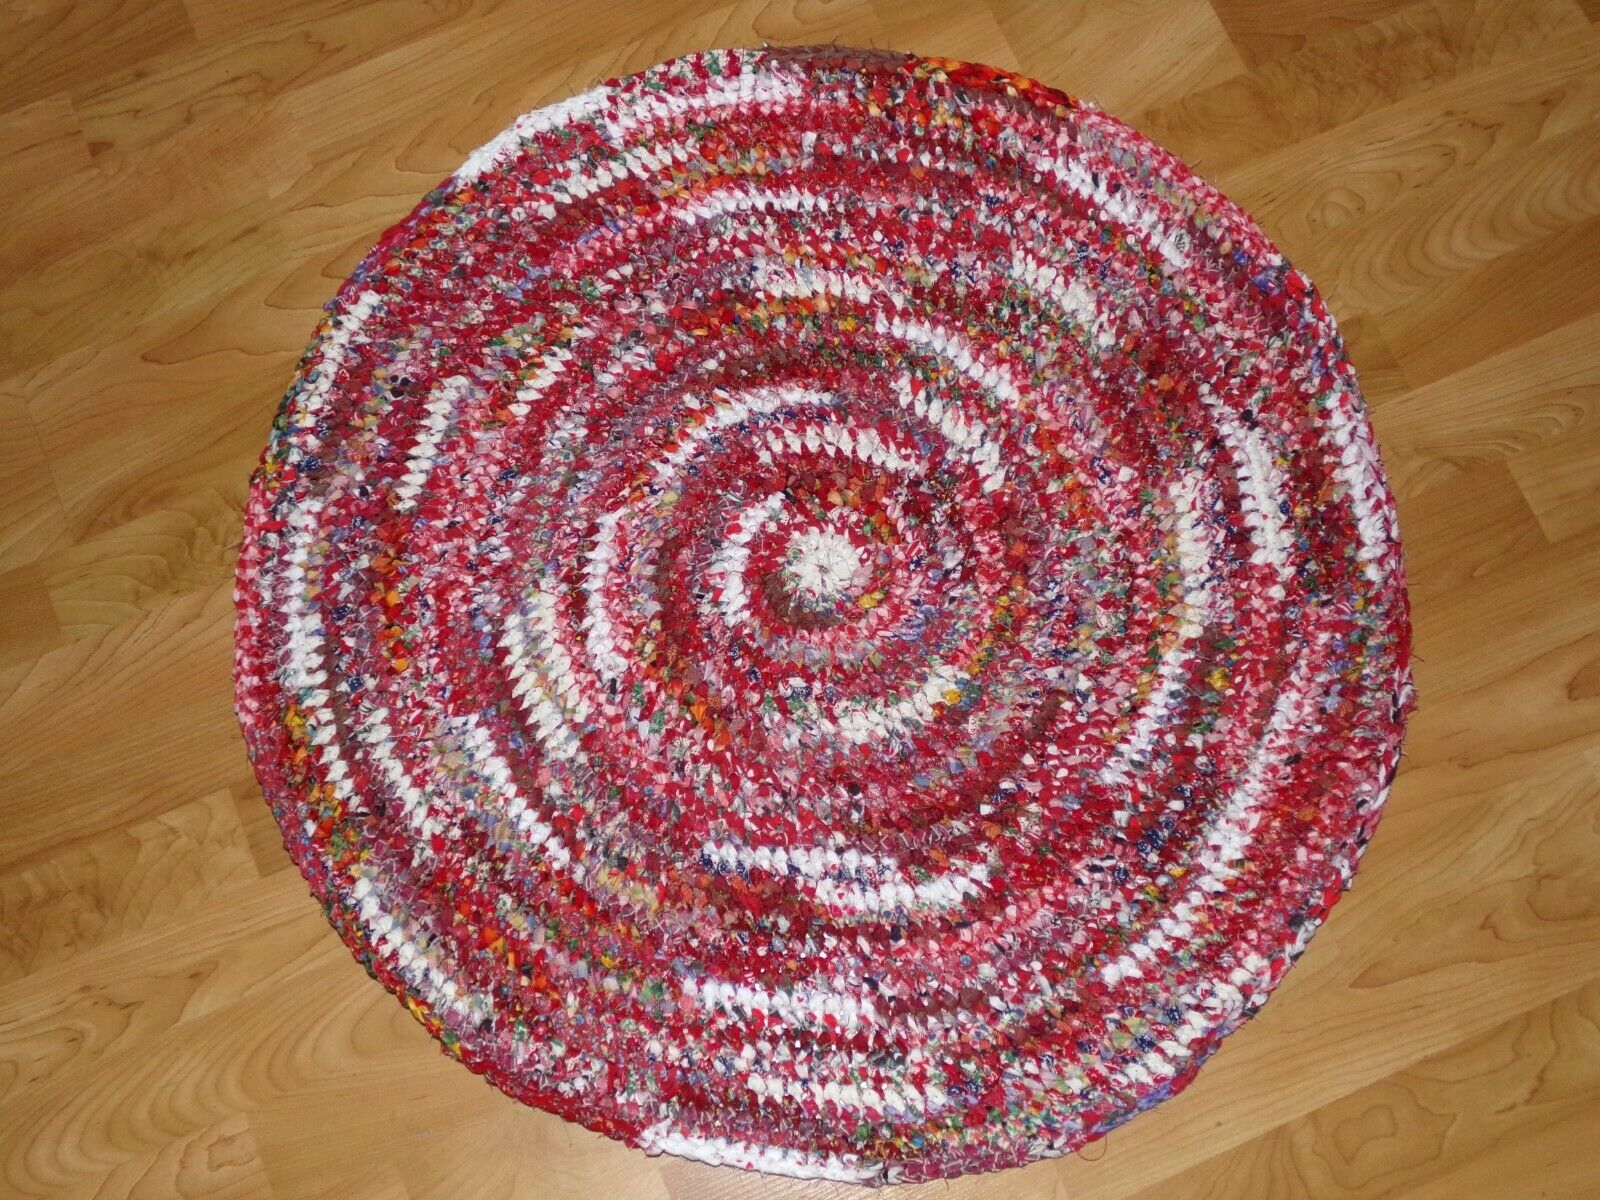 31"  Across, Red Multi-colored Round Crocheted Rag Rug, Handmade, Very Durable